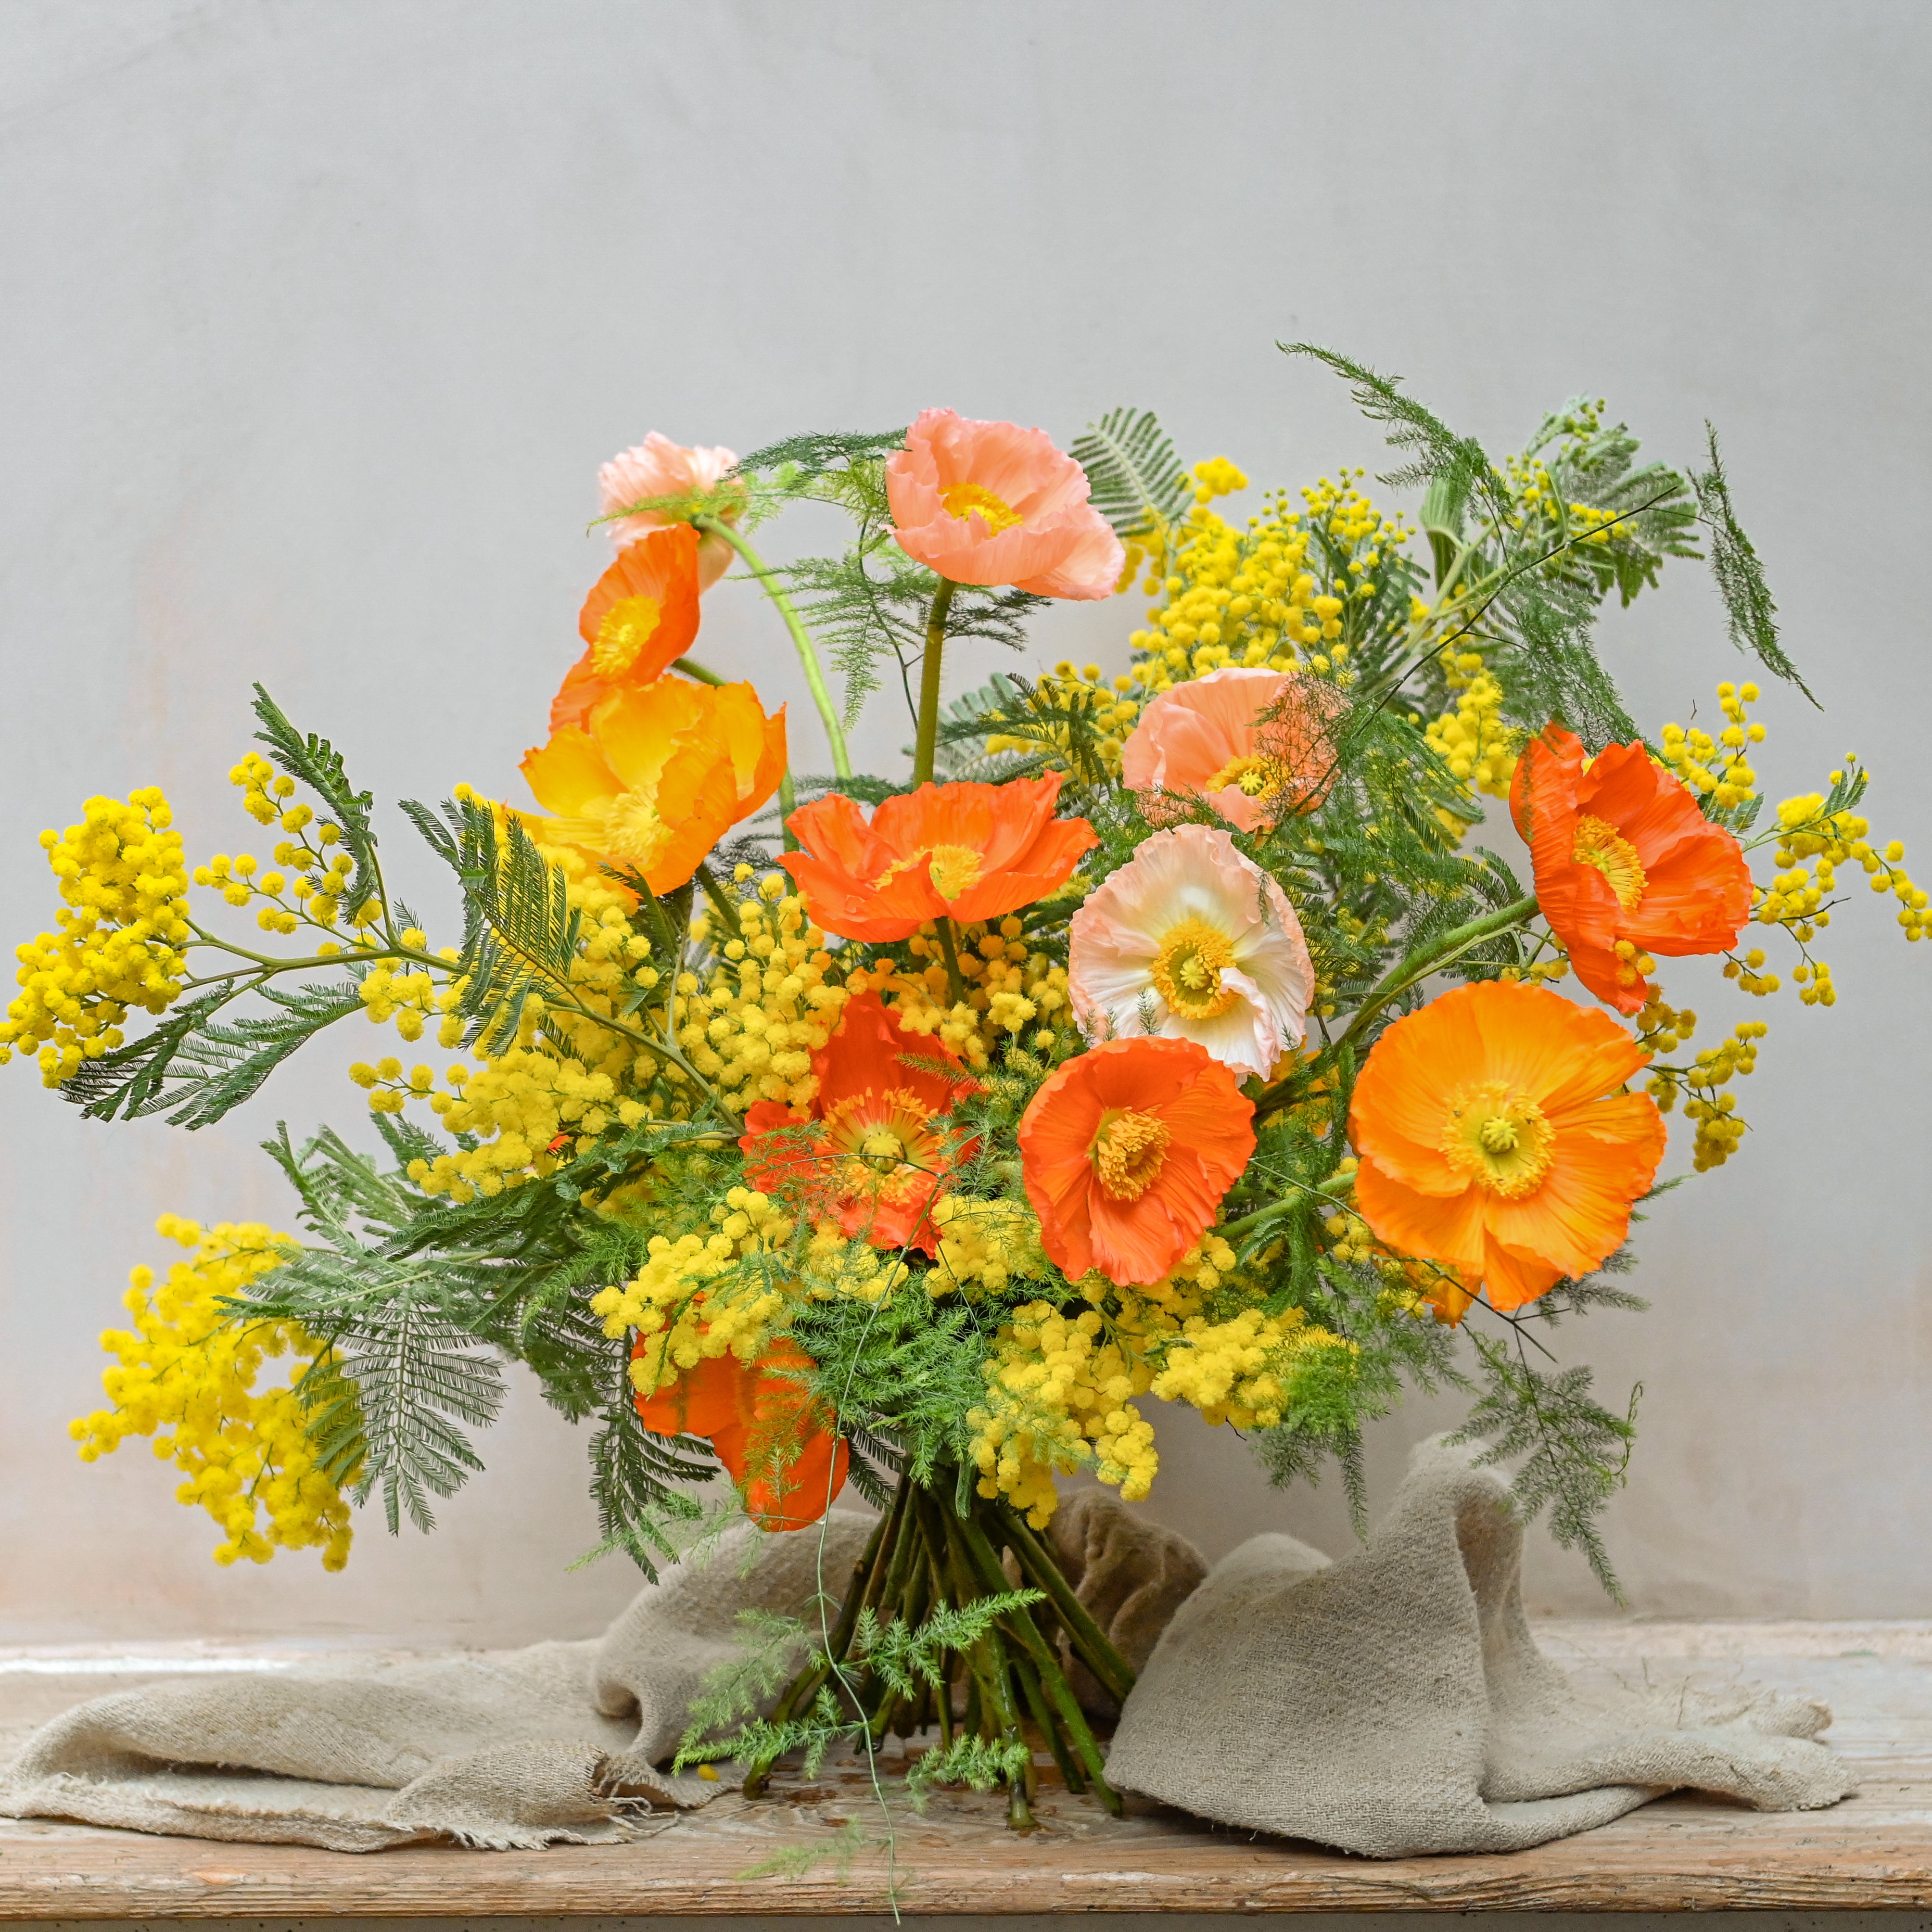 icelandic poppies and mimosa fresh flowers bouquet available for London & UK flower delivery